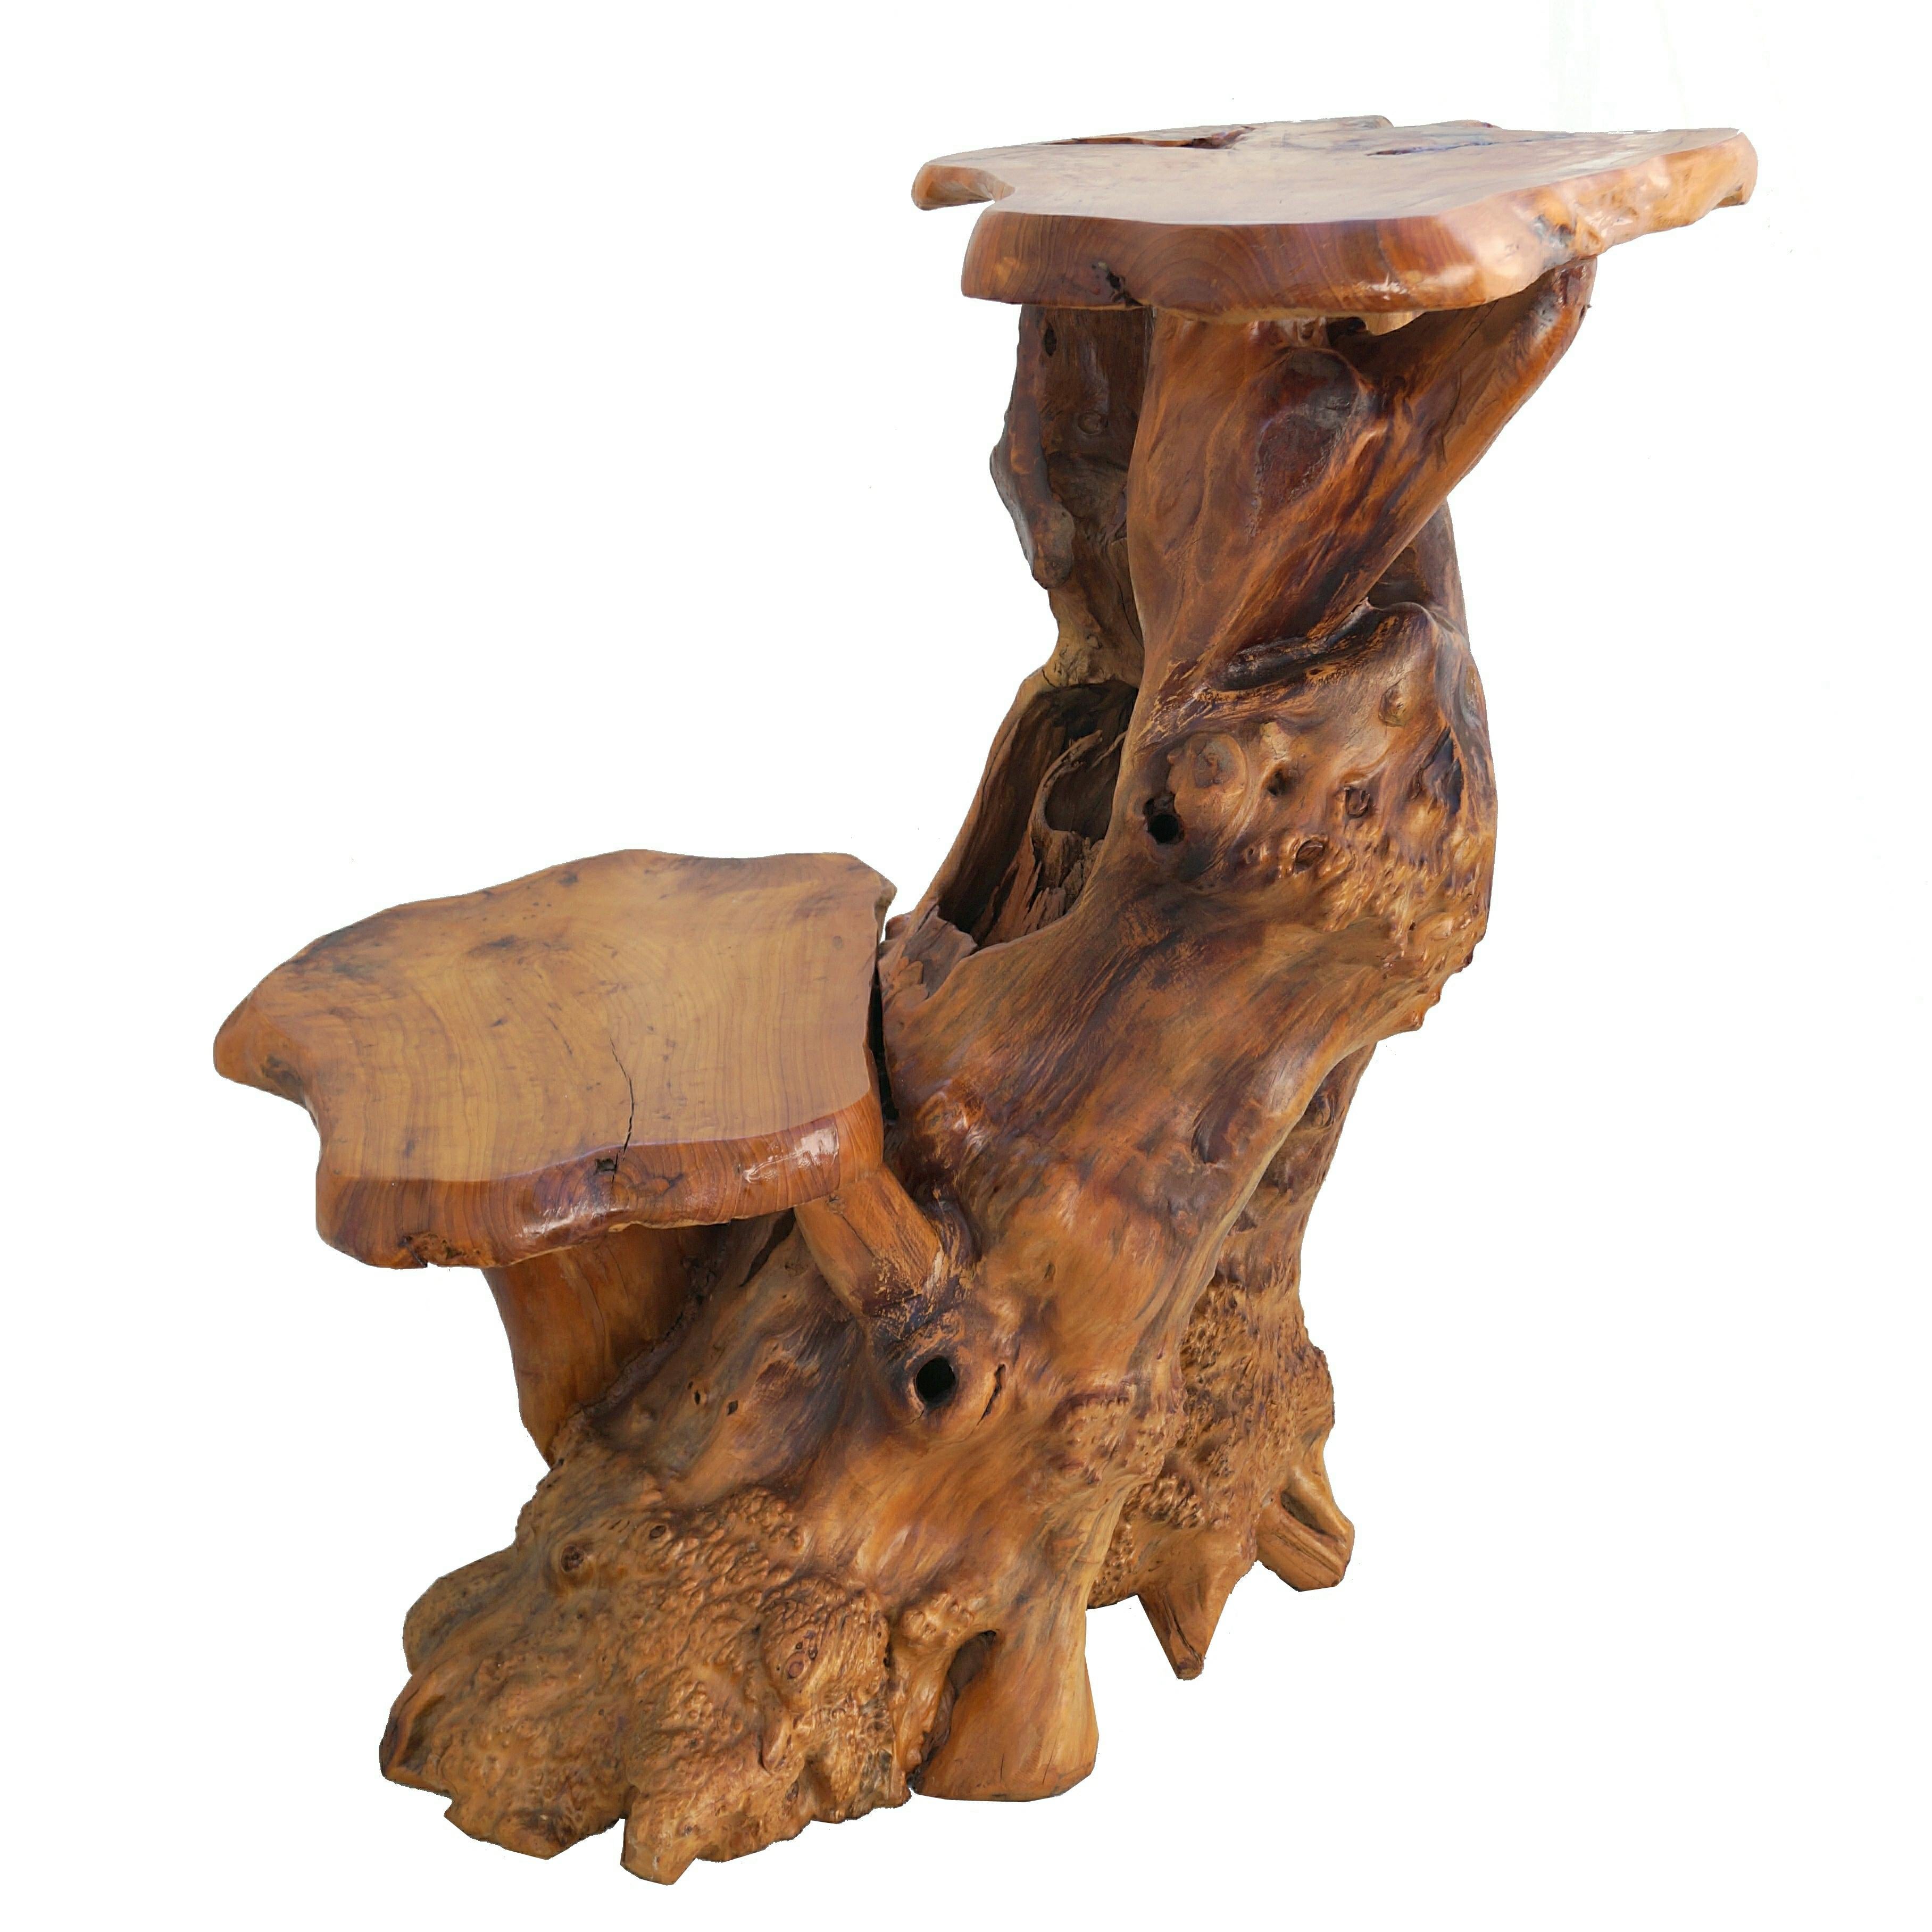 wooden pedestal stand for table